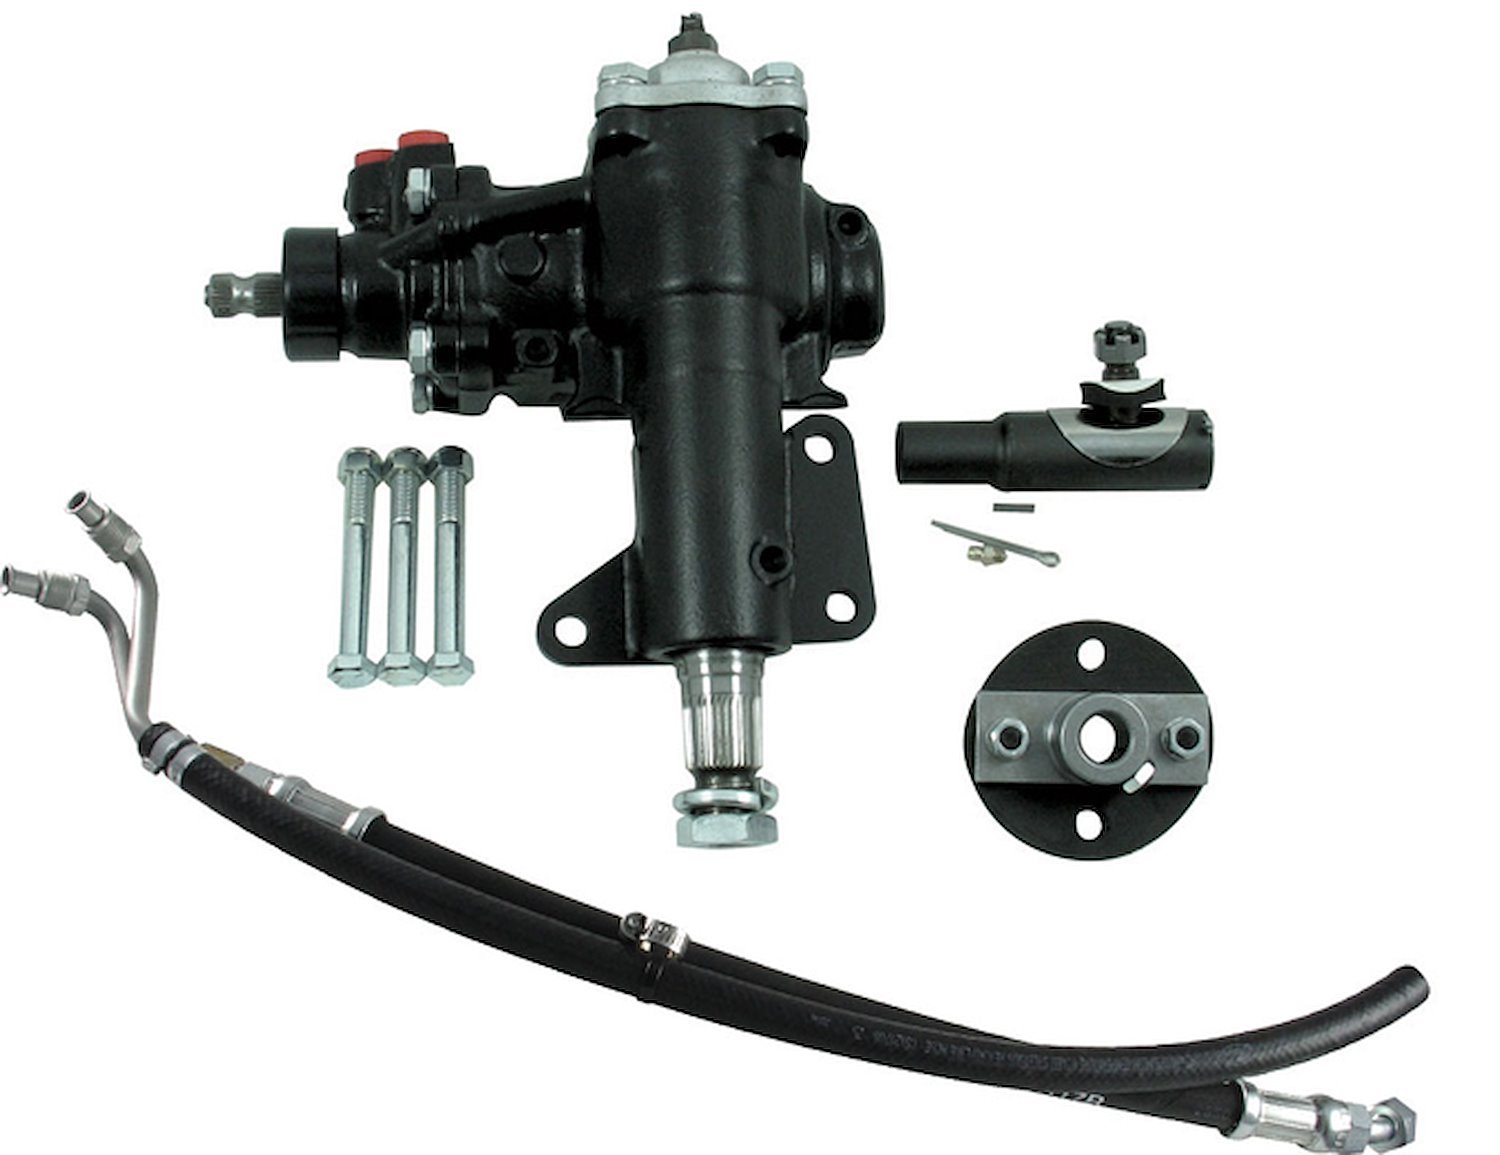 Power Steering Conversion Kit 1967-1977 Ford Mid-Size Cars Small Block/Big Block V8